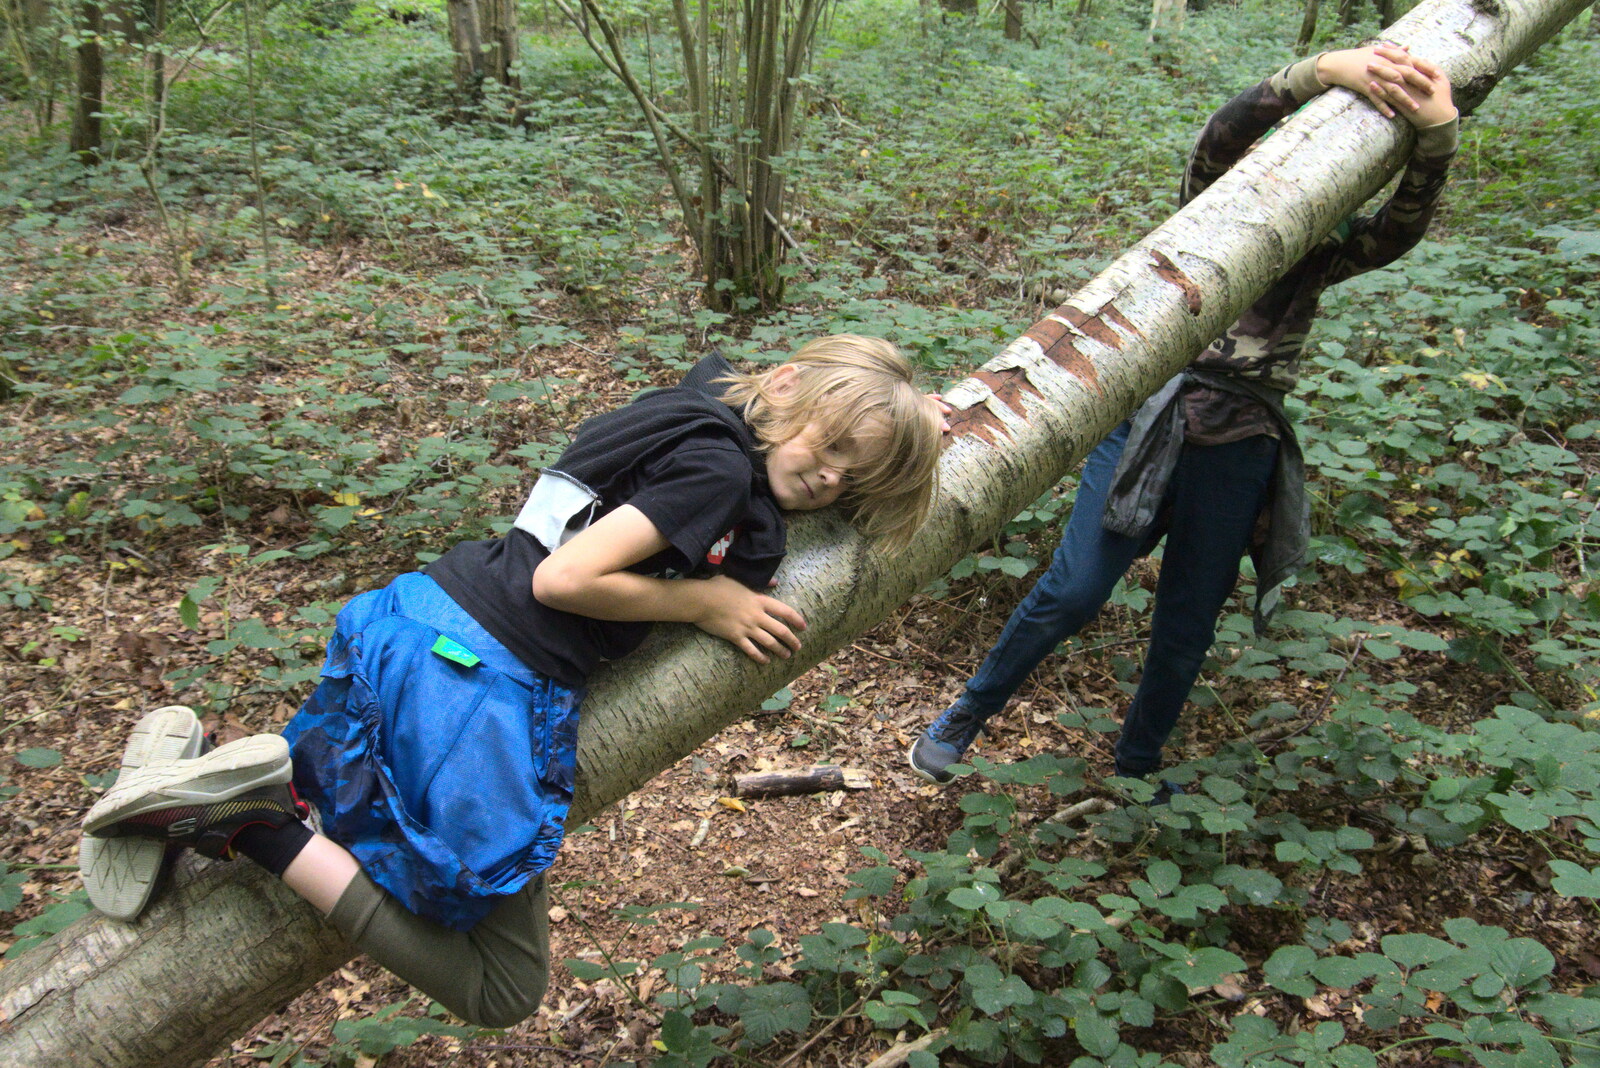 Harry clings to a tree from Jules Visits, and a Trip to Tyrrel's Wood, Pulham Market, Norfolk - 16th August 2020